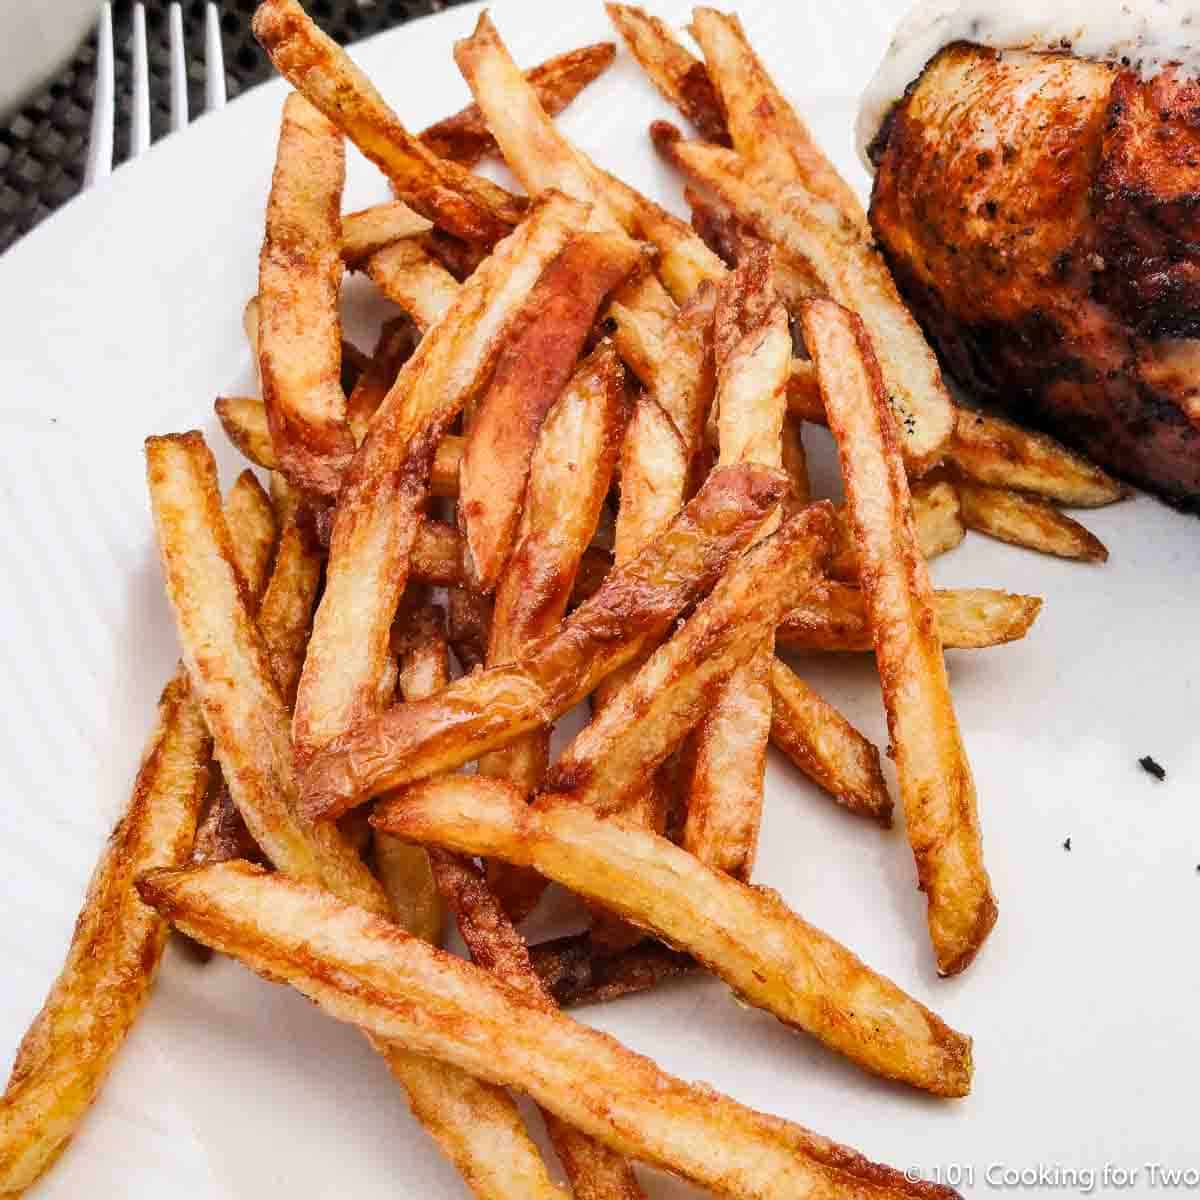 French fries on a white plate.